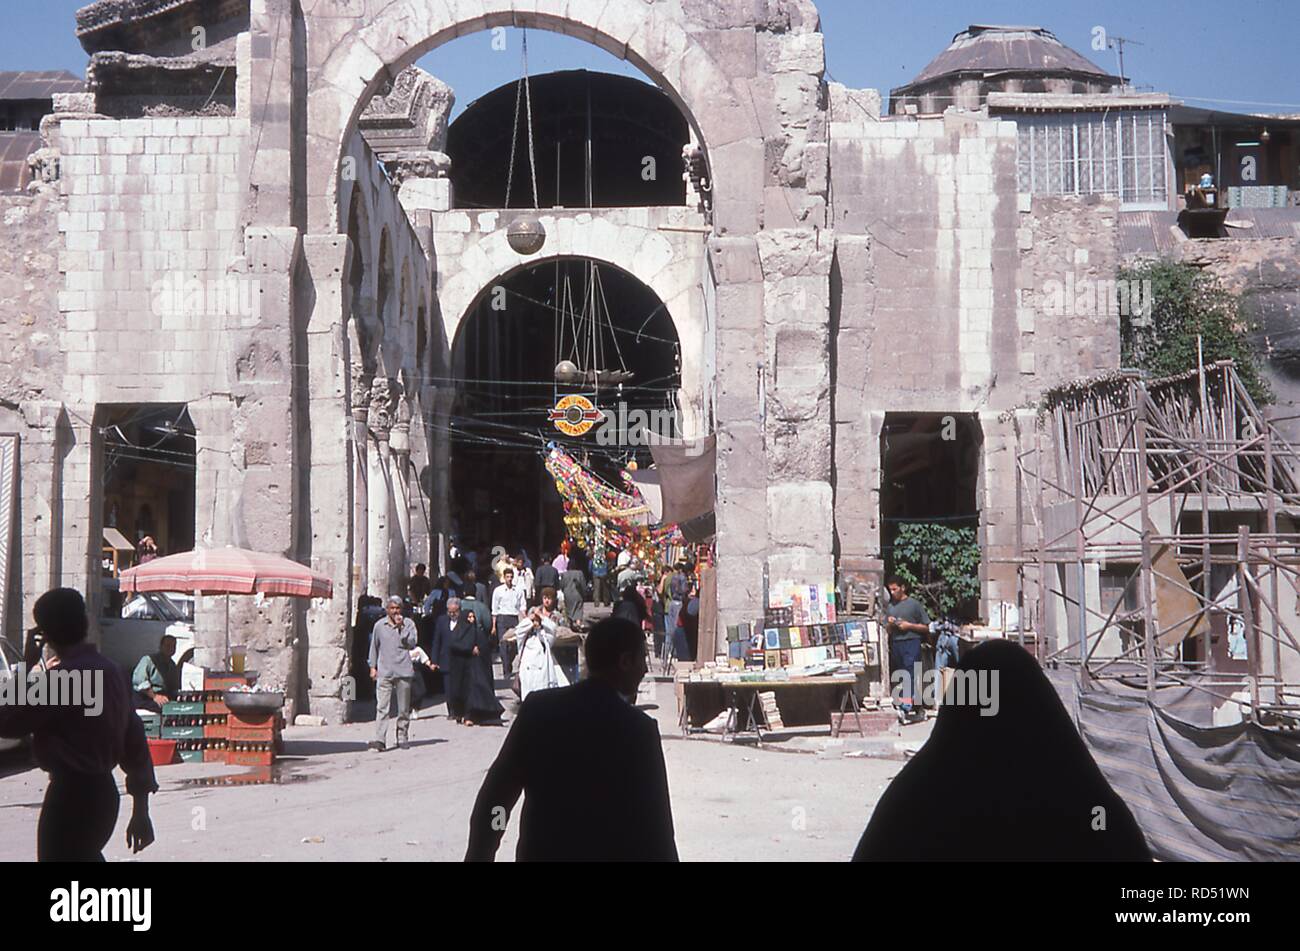 Busy street scene outside the Al-Hamidiyah Souk in the Old City of Damascus, Syria, June, 1994. Men and women walk among the stalls selling books, refreshments, and decorations just outside the entrance. () Stock Photo